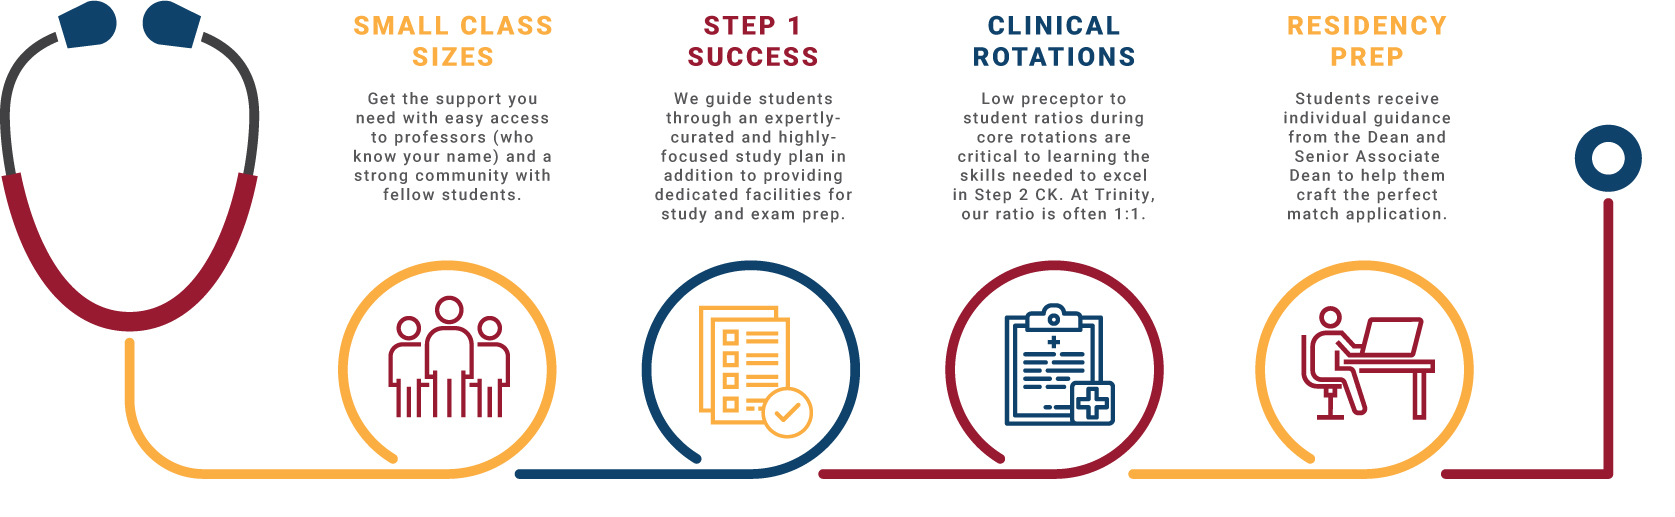 Infographic of the benefits of medical school at Trinity